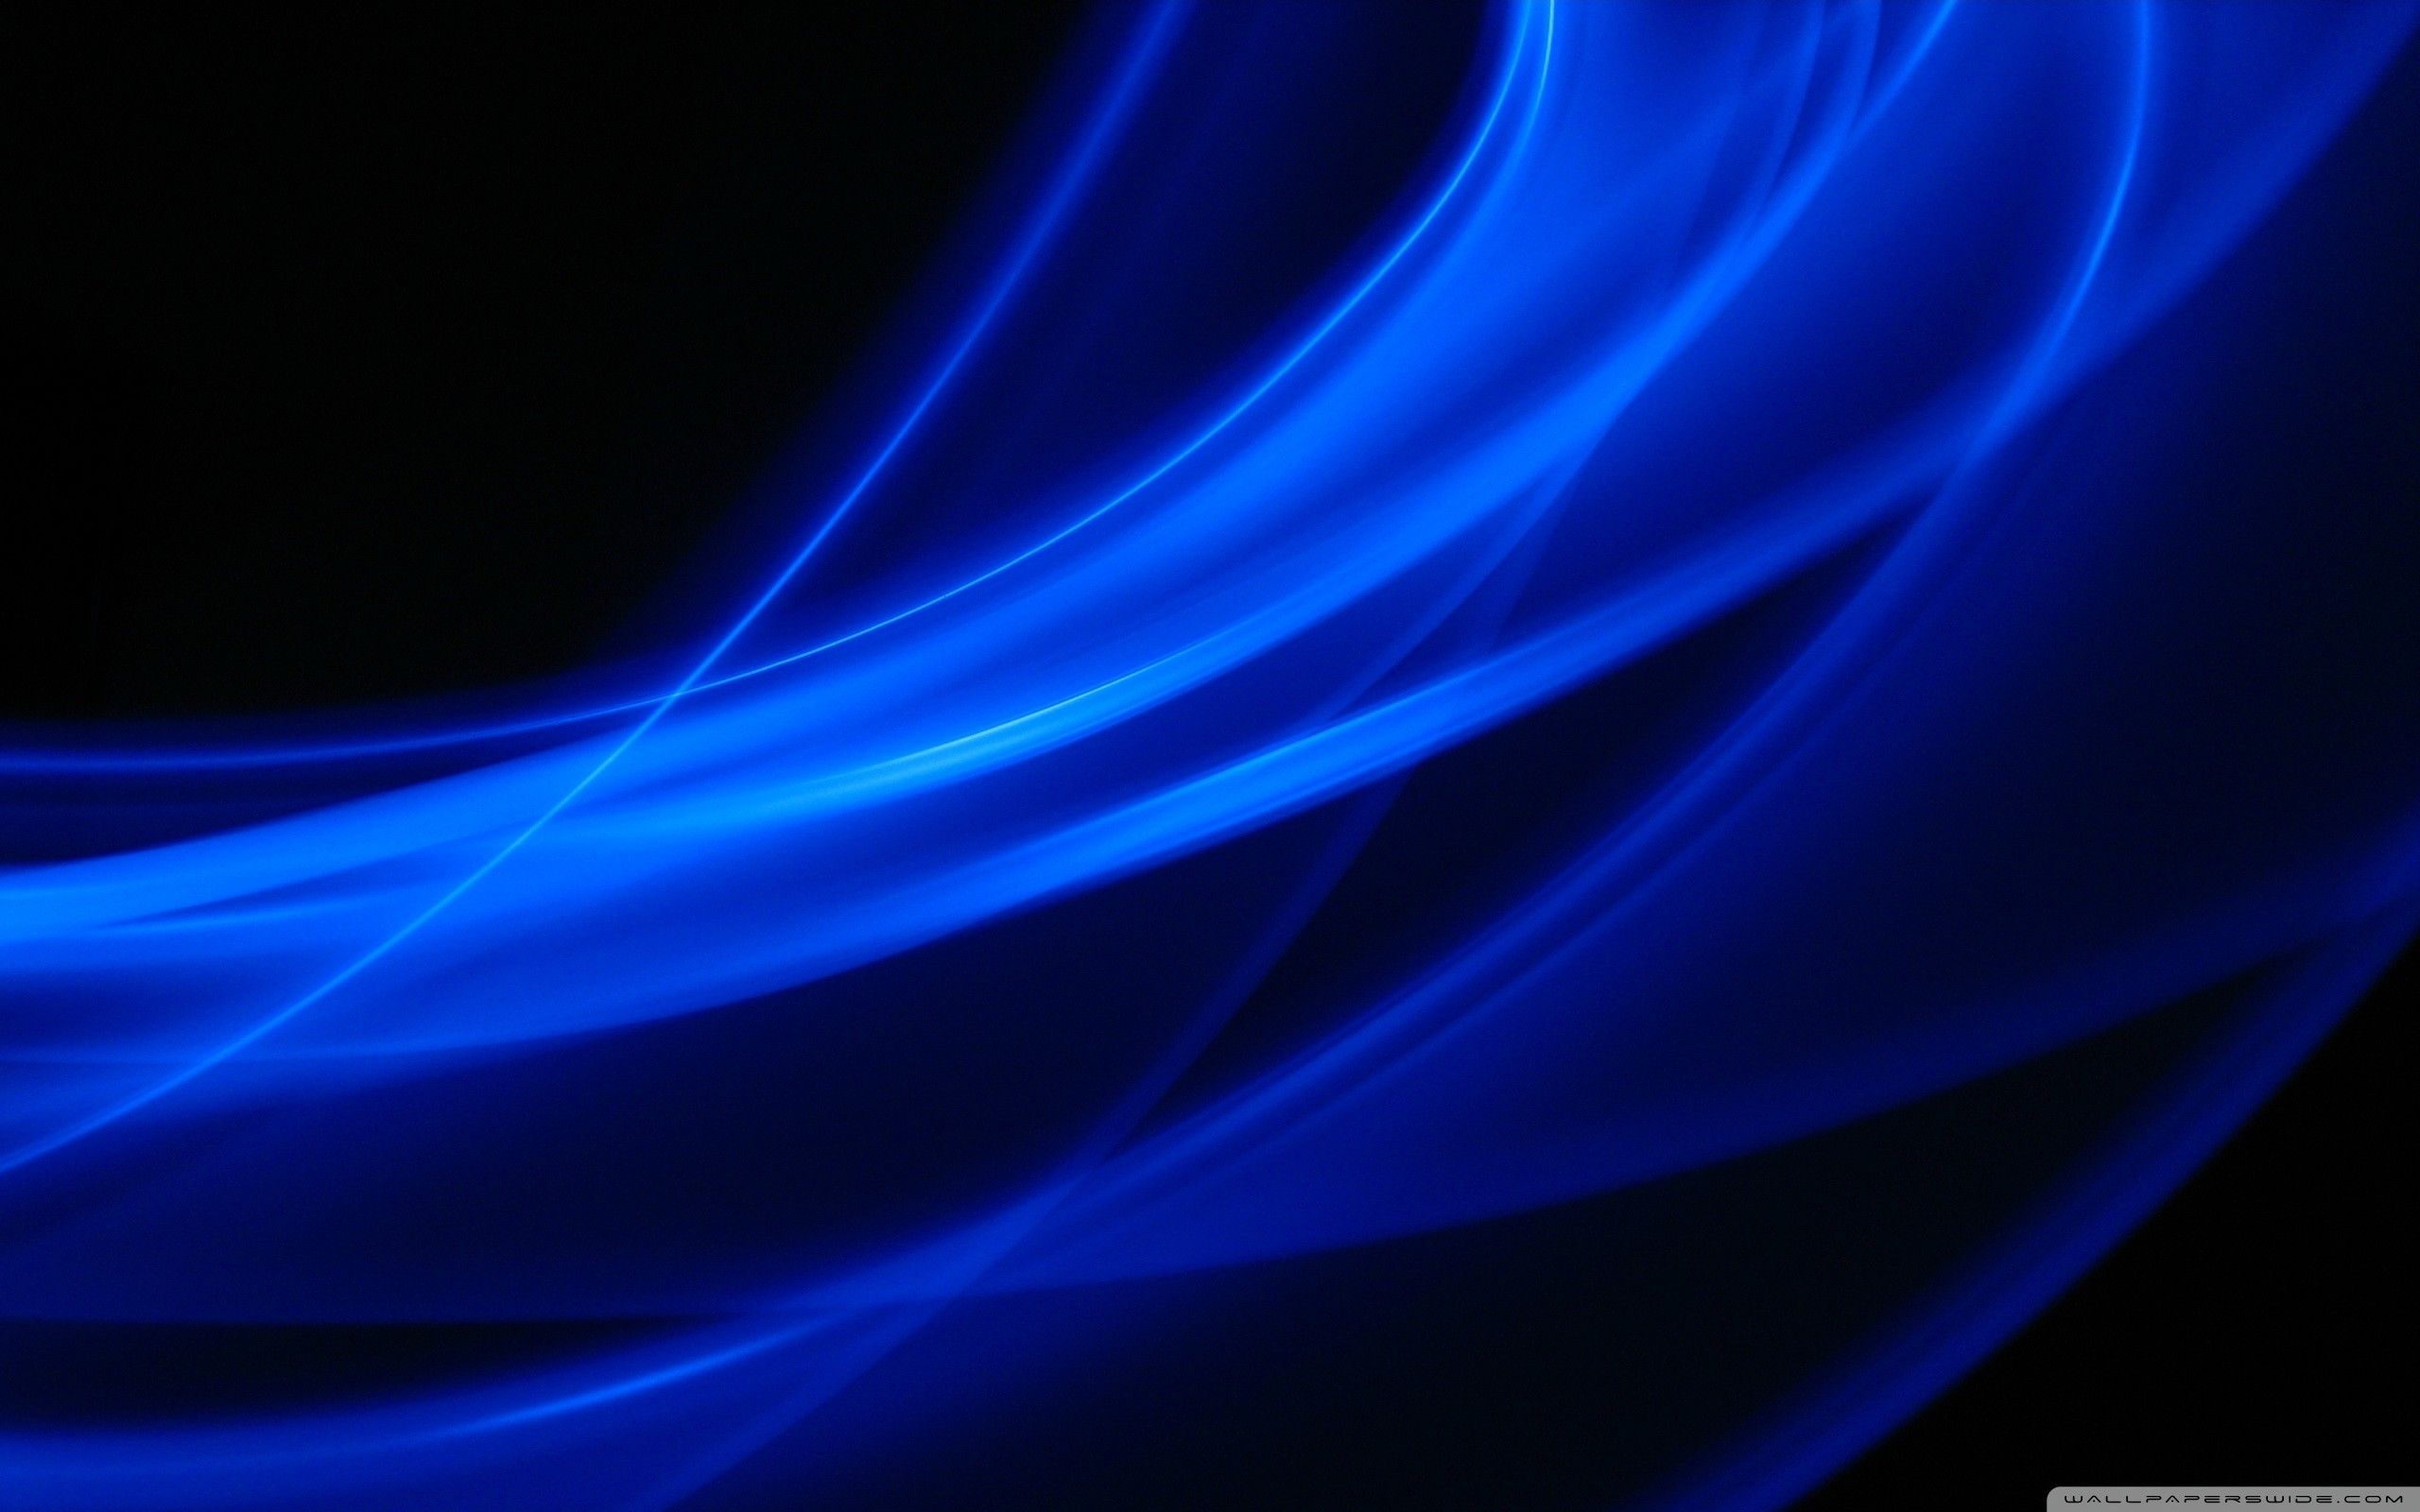 Blue Colored Wallpapers